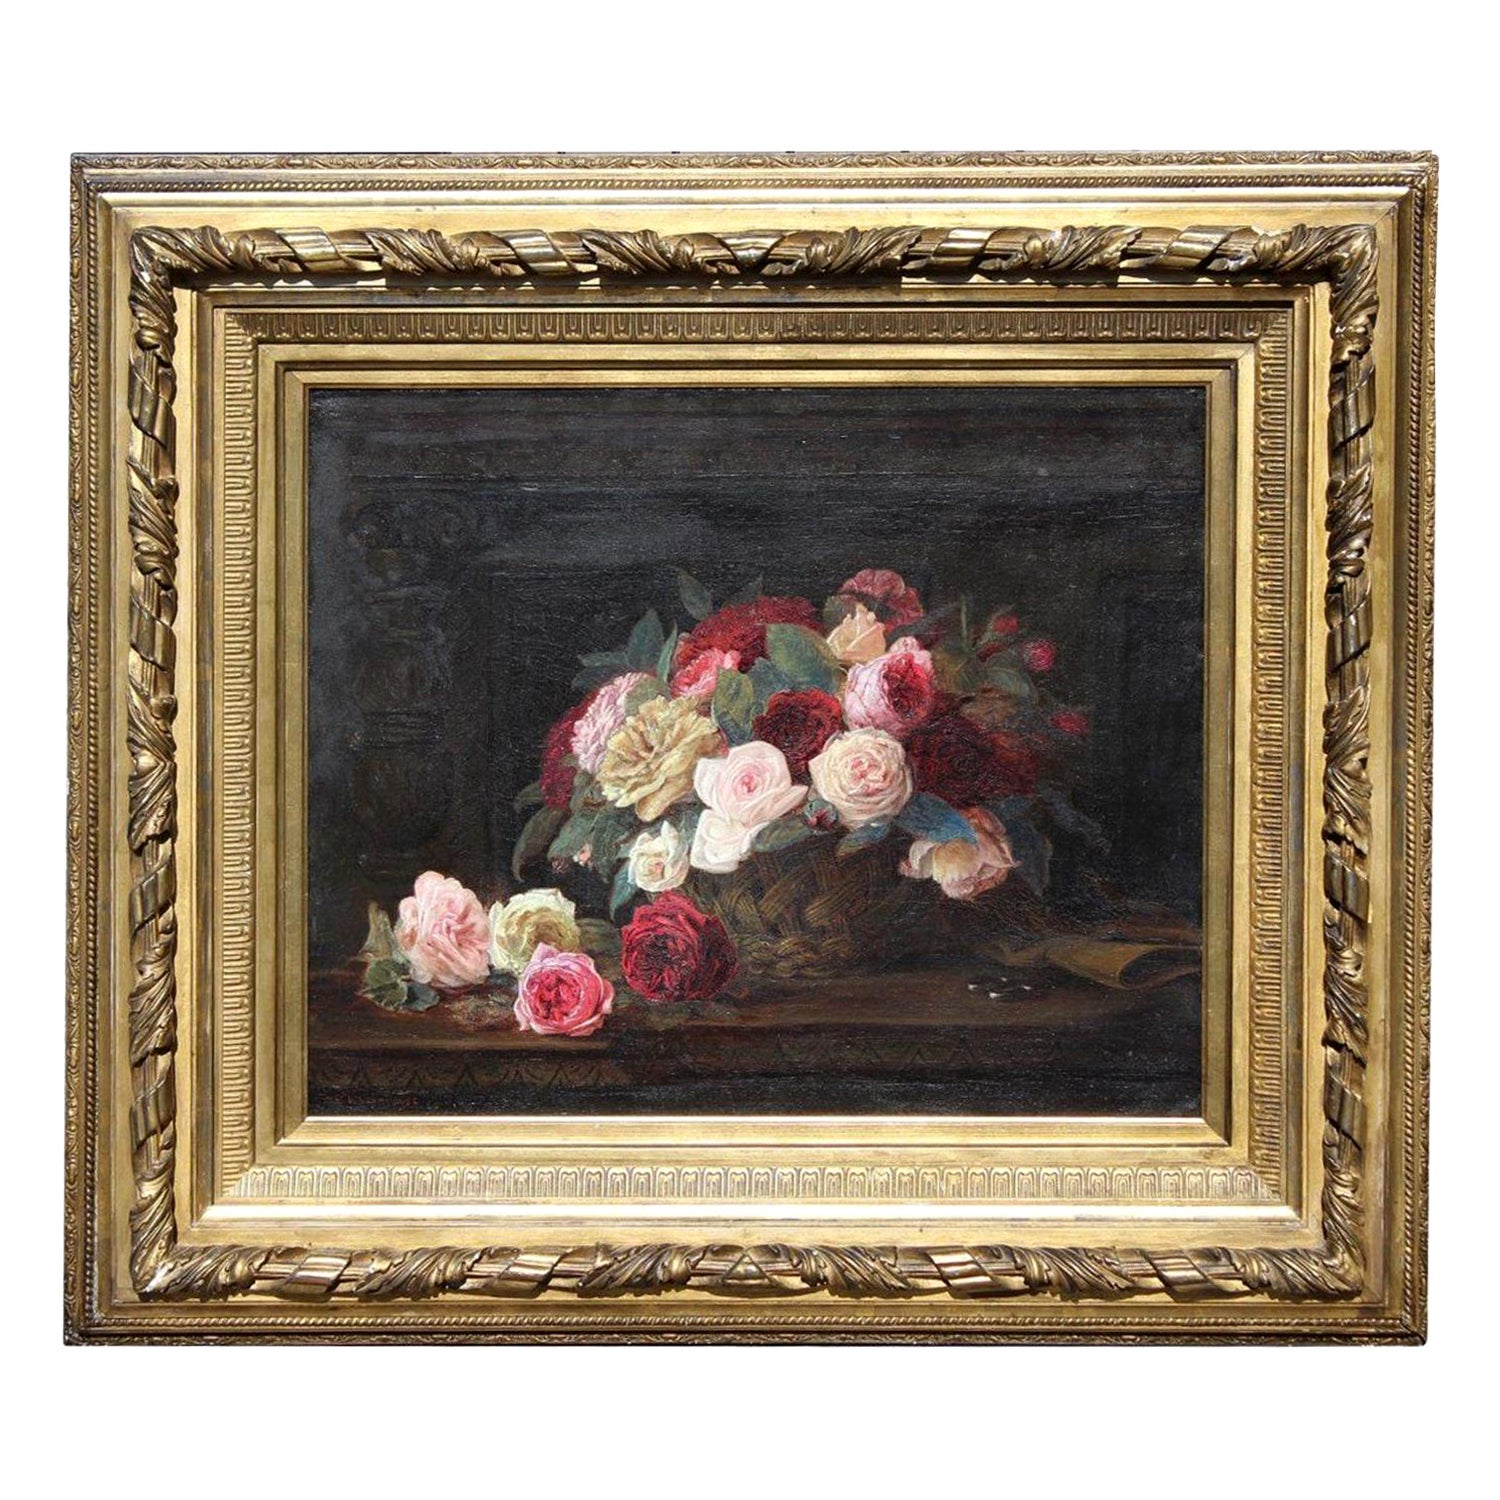 19th Century English Oil Painting with Flowers by John William Waterhouse